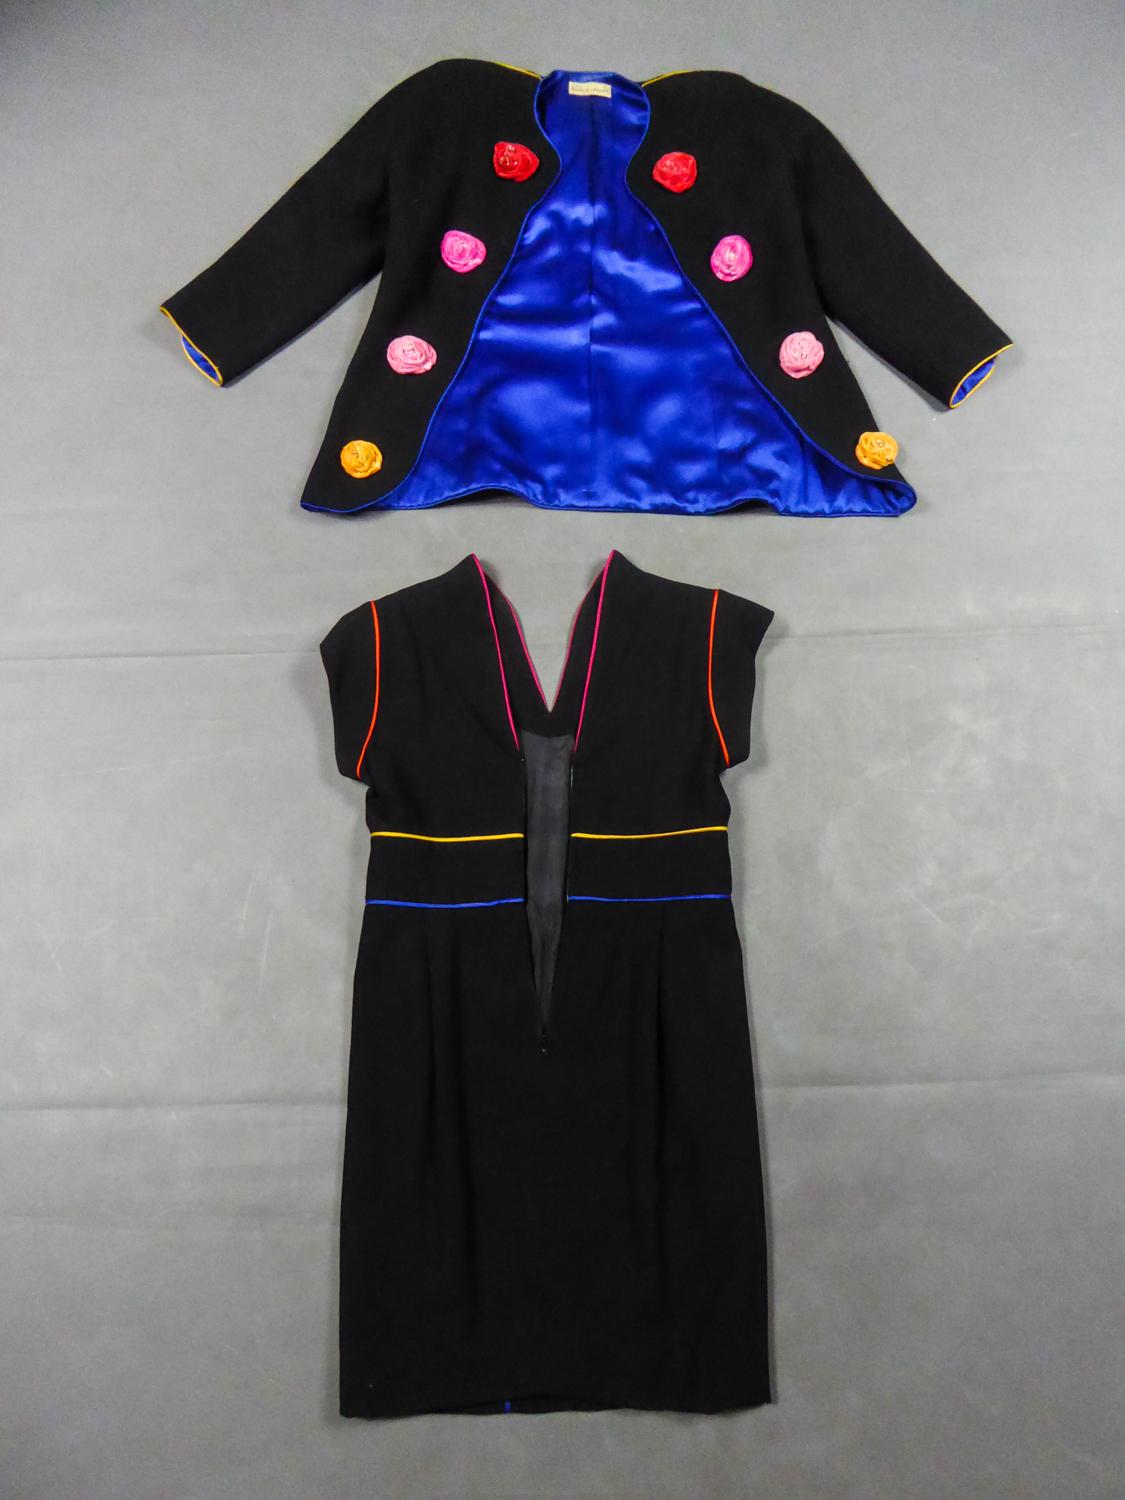 Autumn Winter Collection 1991/1992
France

Dress and jacket set in wool crepe by Emanuel Ungaro Couture Collection 1991/1992. Couture numbered 28819 and 9995. Skin-tight dress with satin piping in the shades or red, blue and yellow pink, shoulder